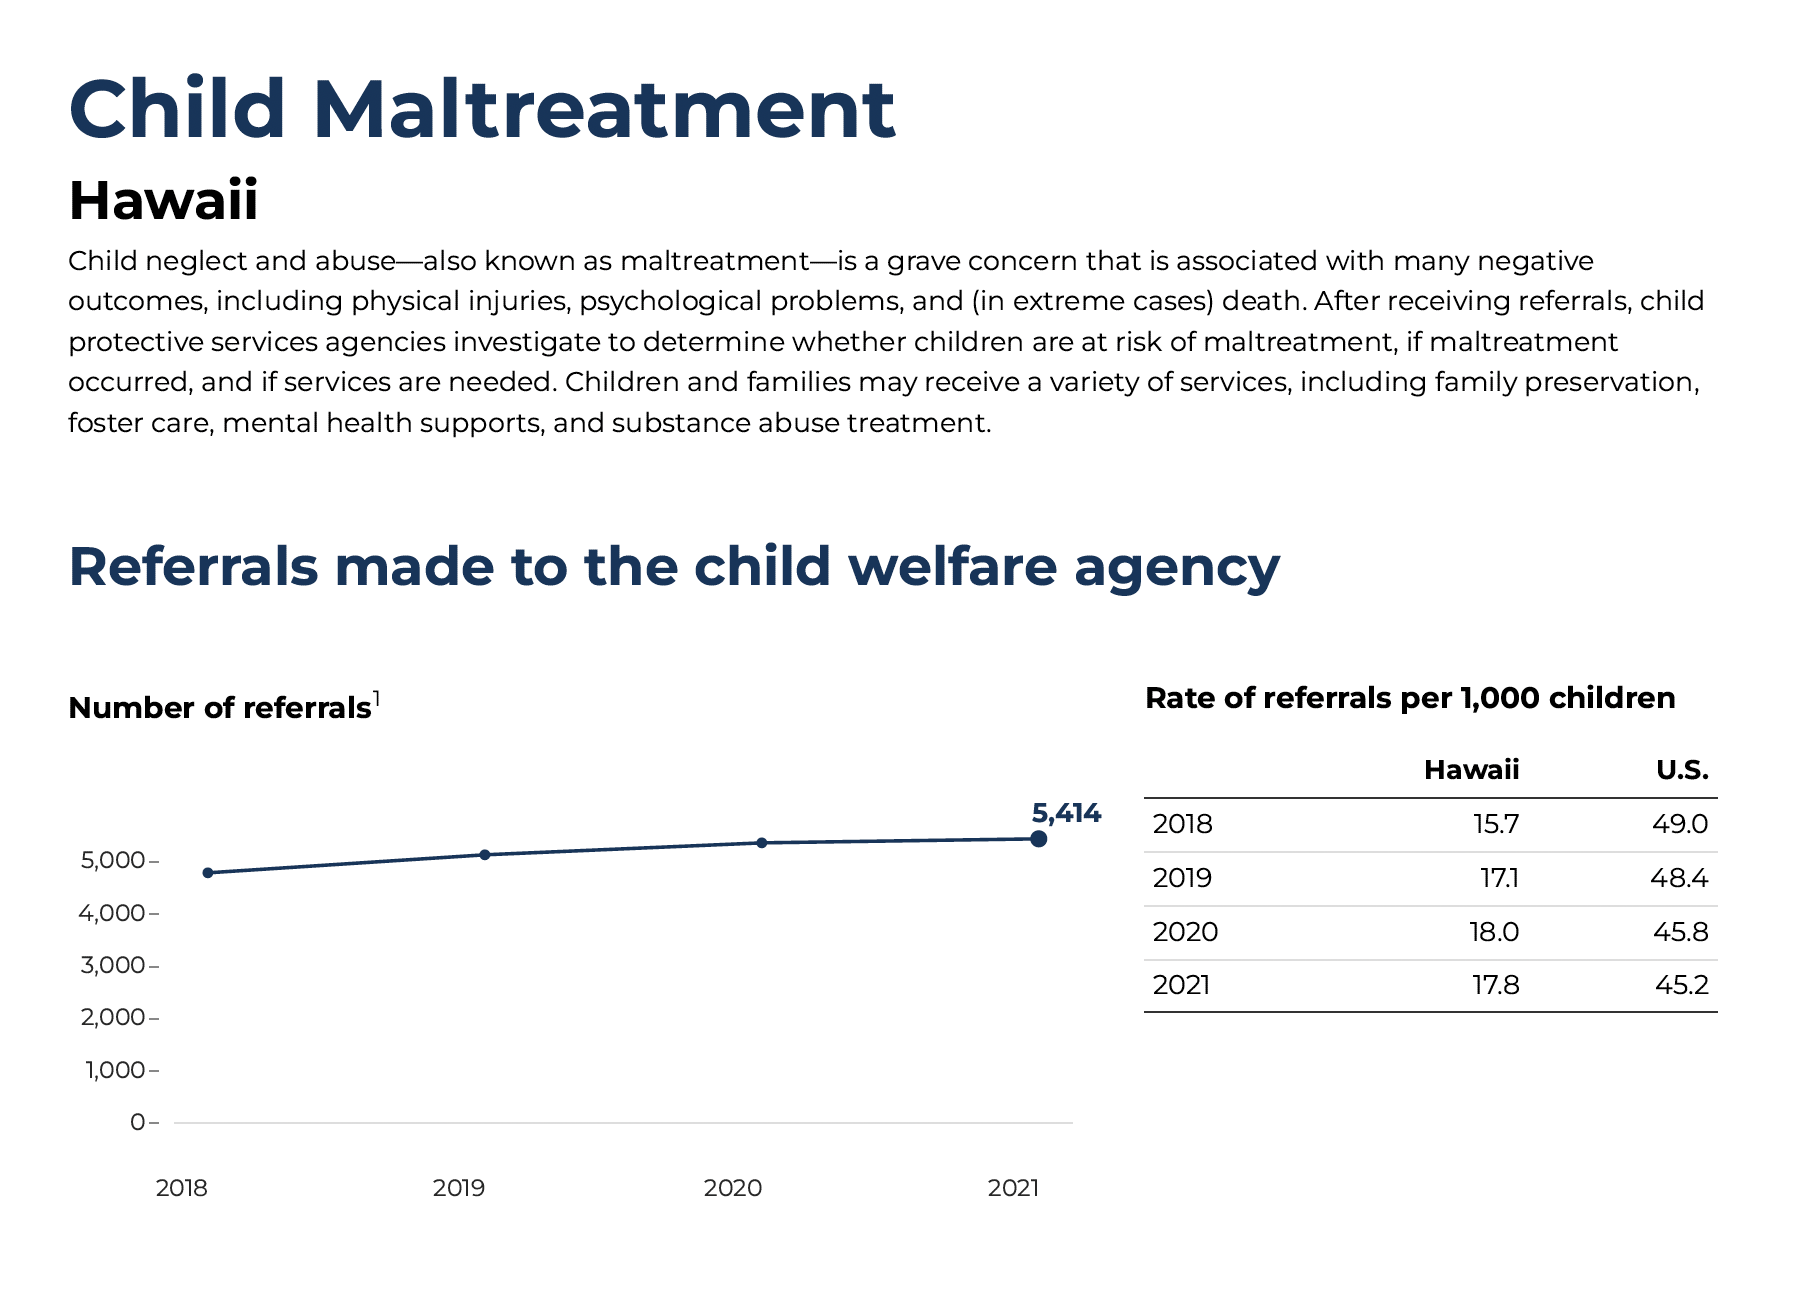 State Level Data for Understanding Child Welfare in the United States